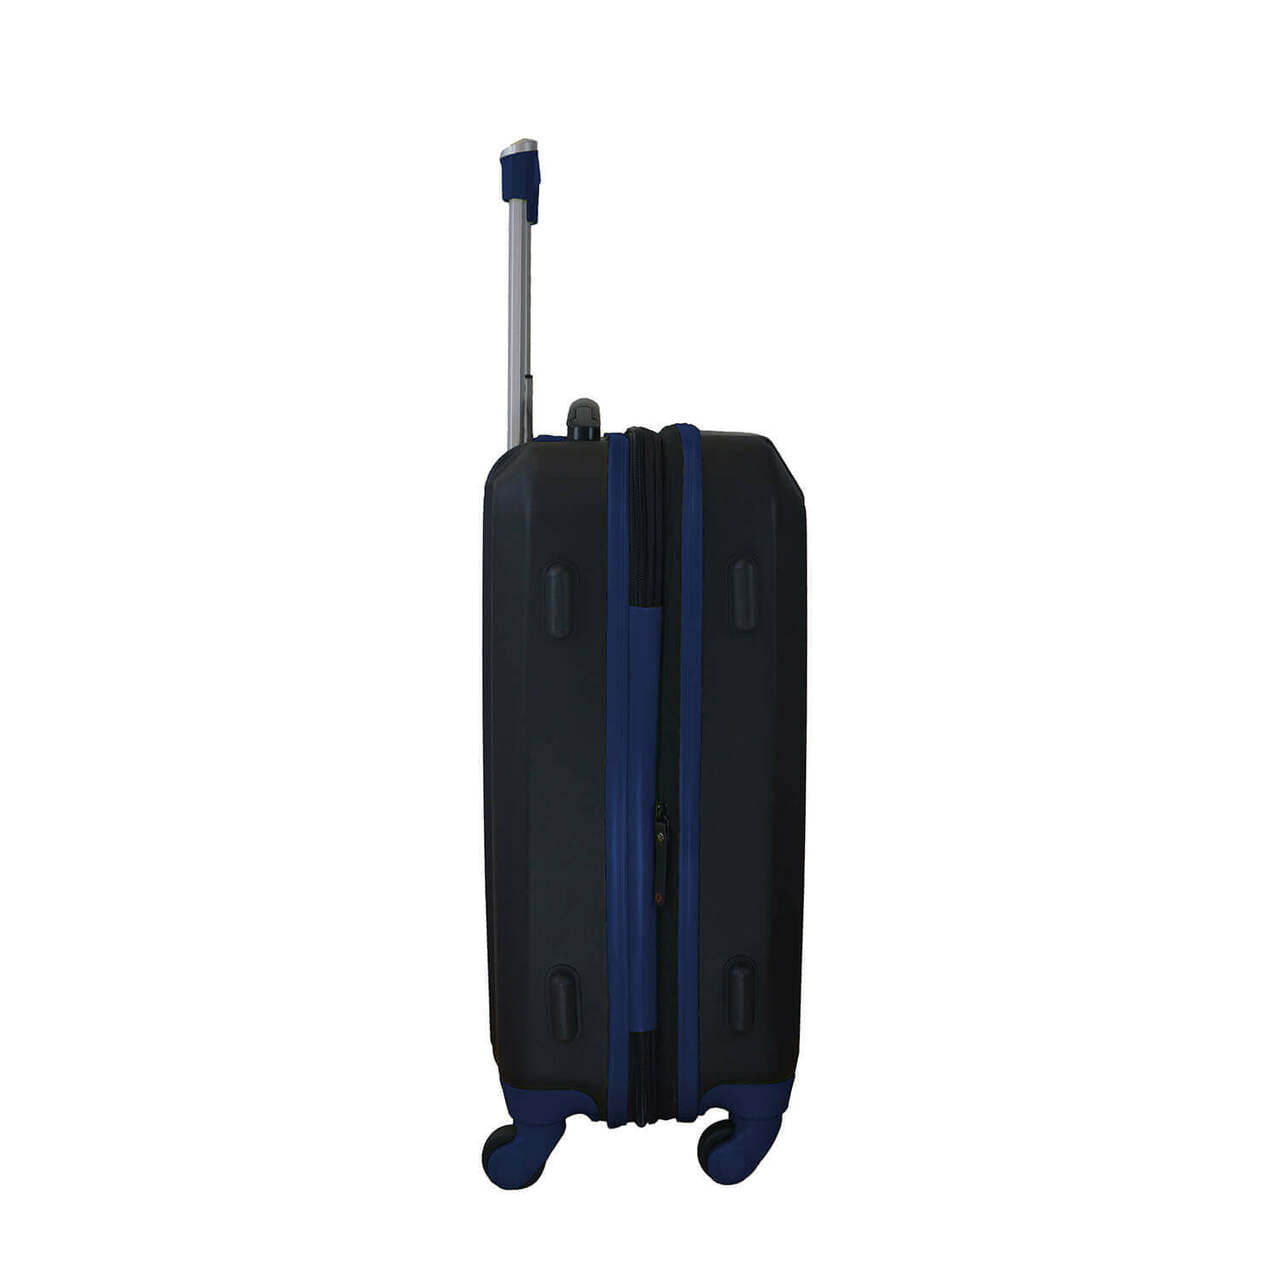 Pittsburgh Carry On Spinner Luggage | Pittsburgh Hardcase Two-Tone Luggage Carry-on Spinner in Navy